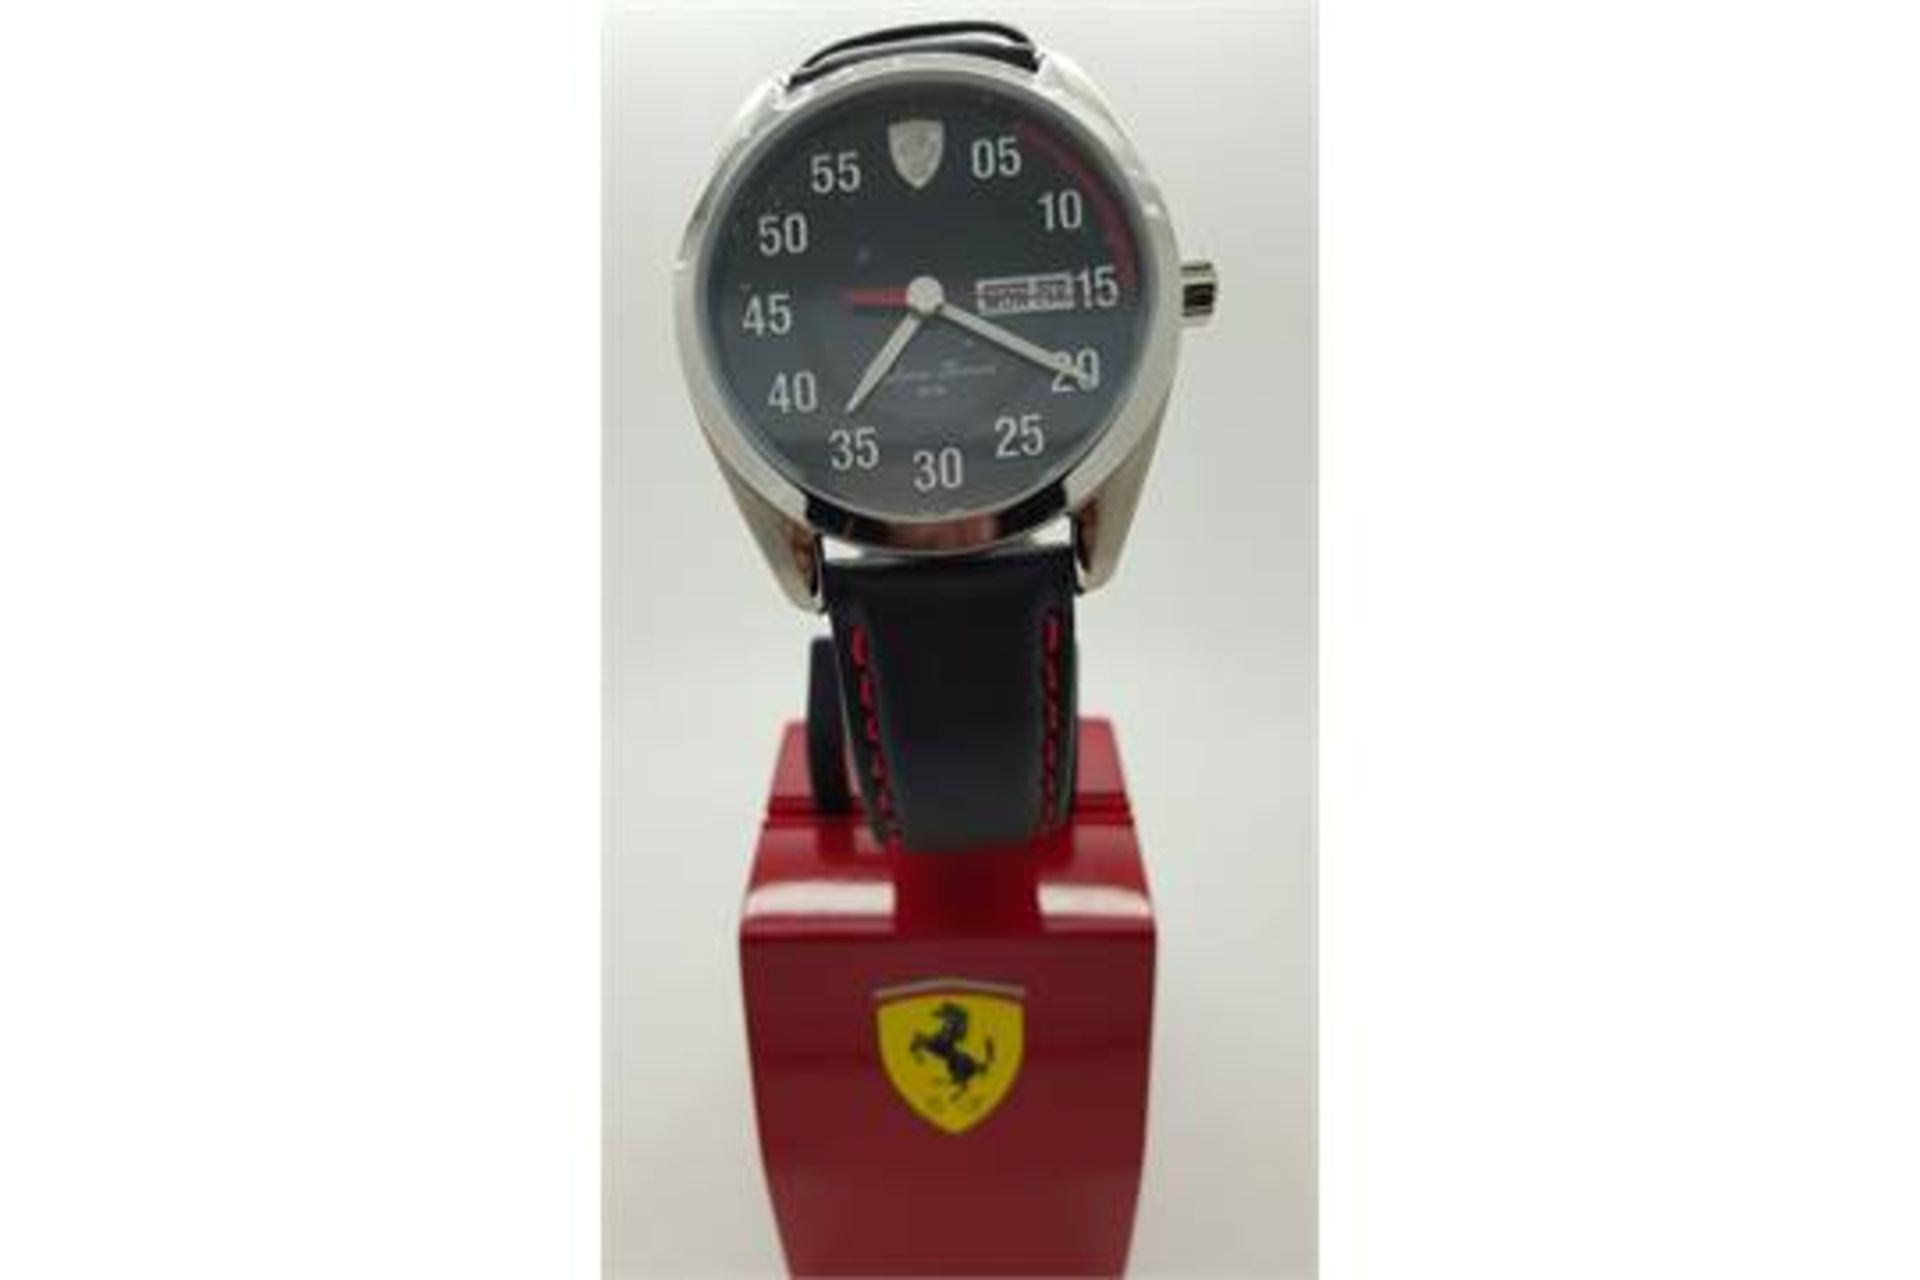 Ferrari gents watch 830173 42mm case Black band and black face 30M water resistant